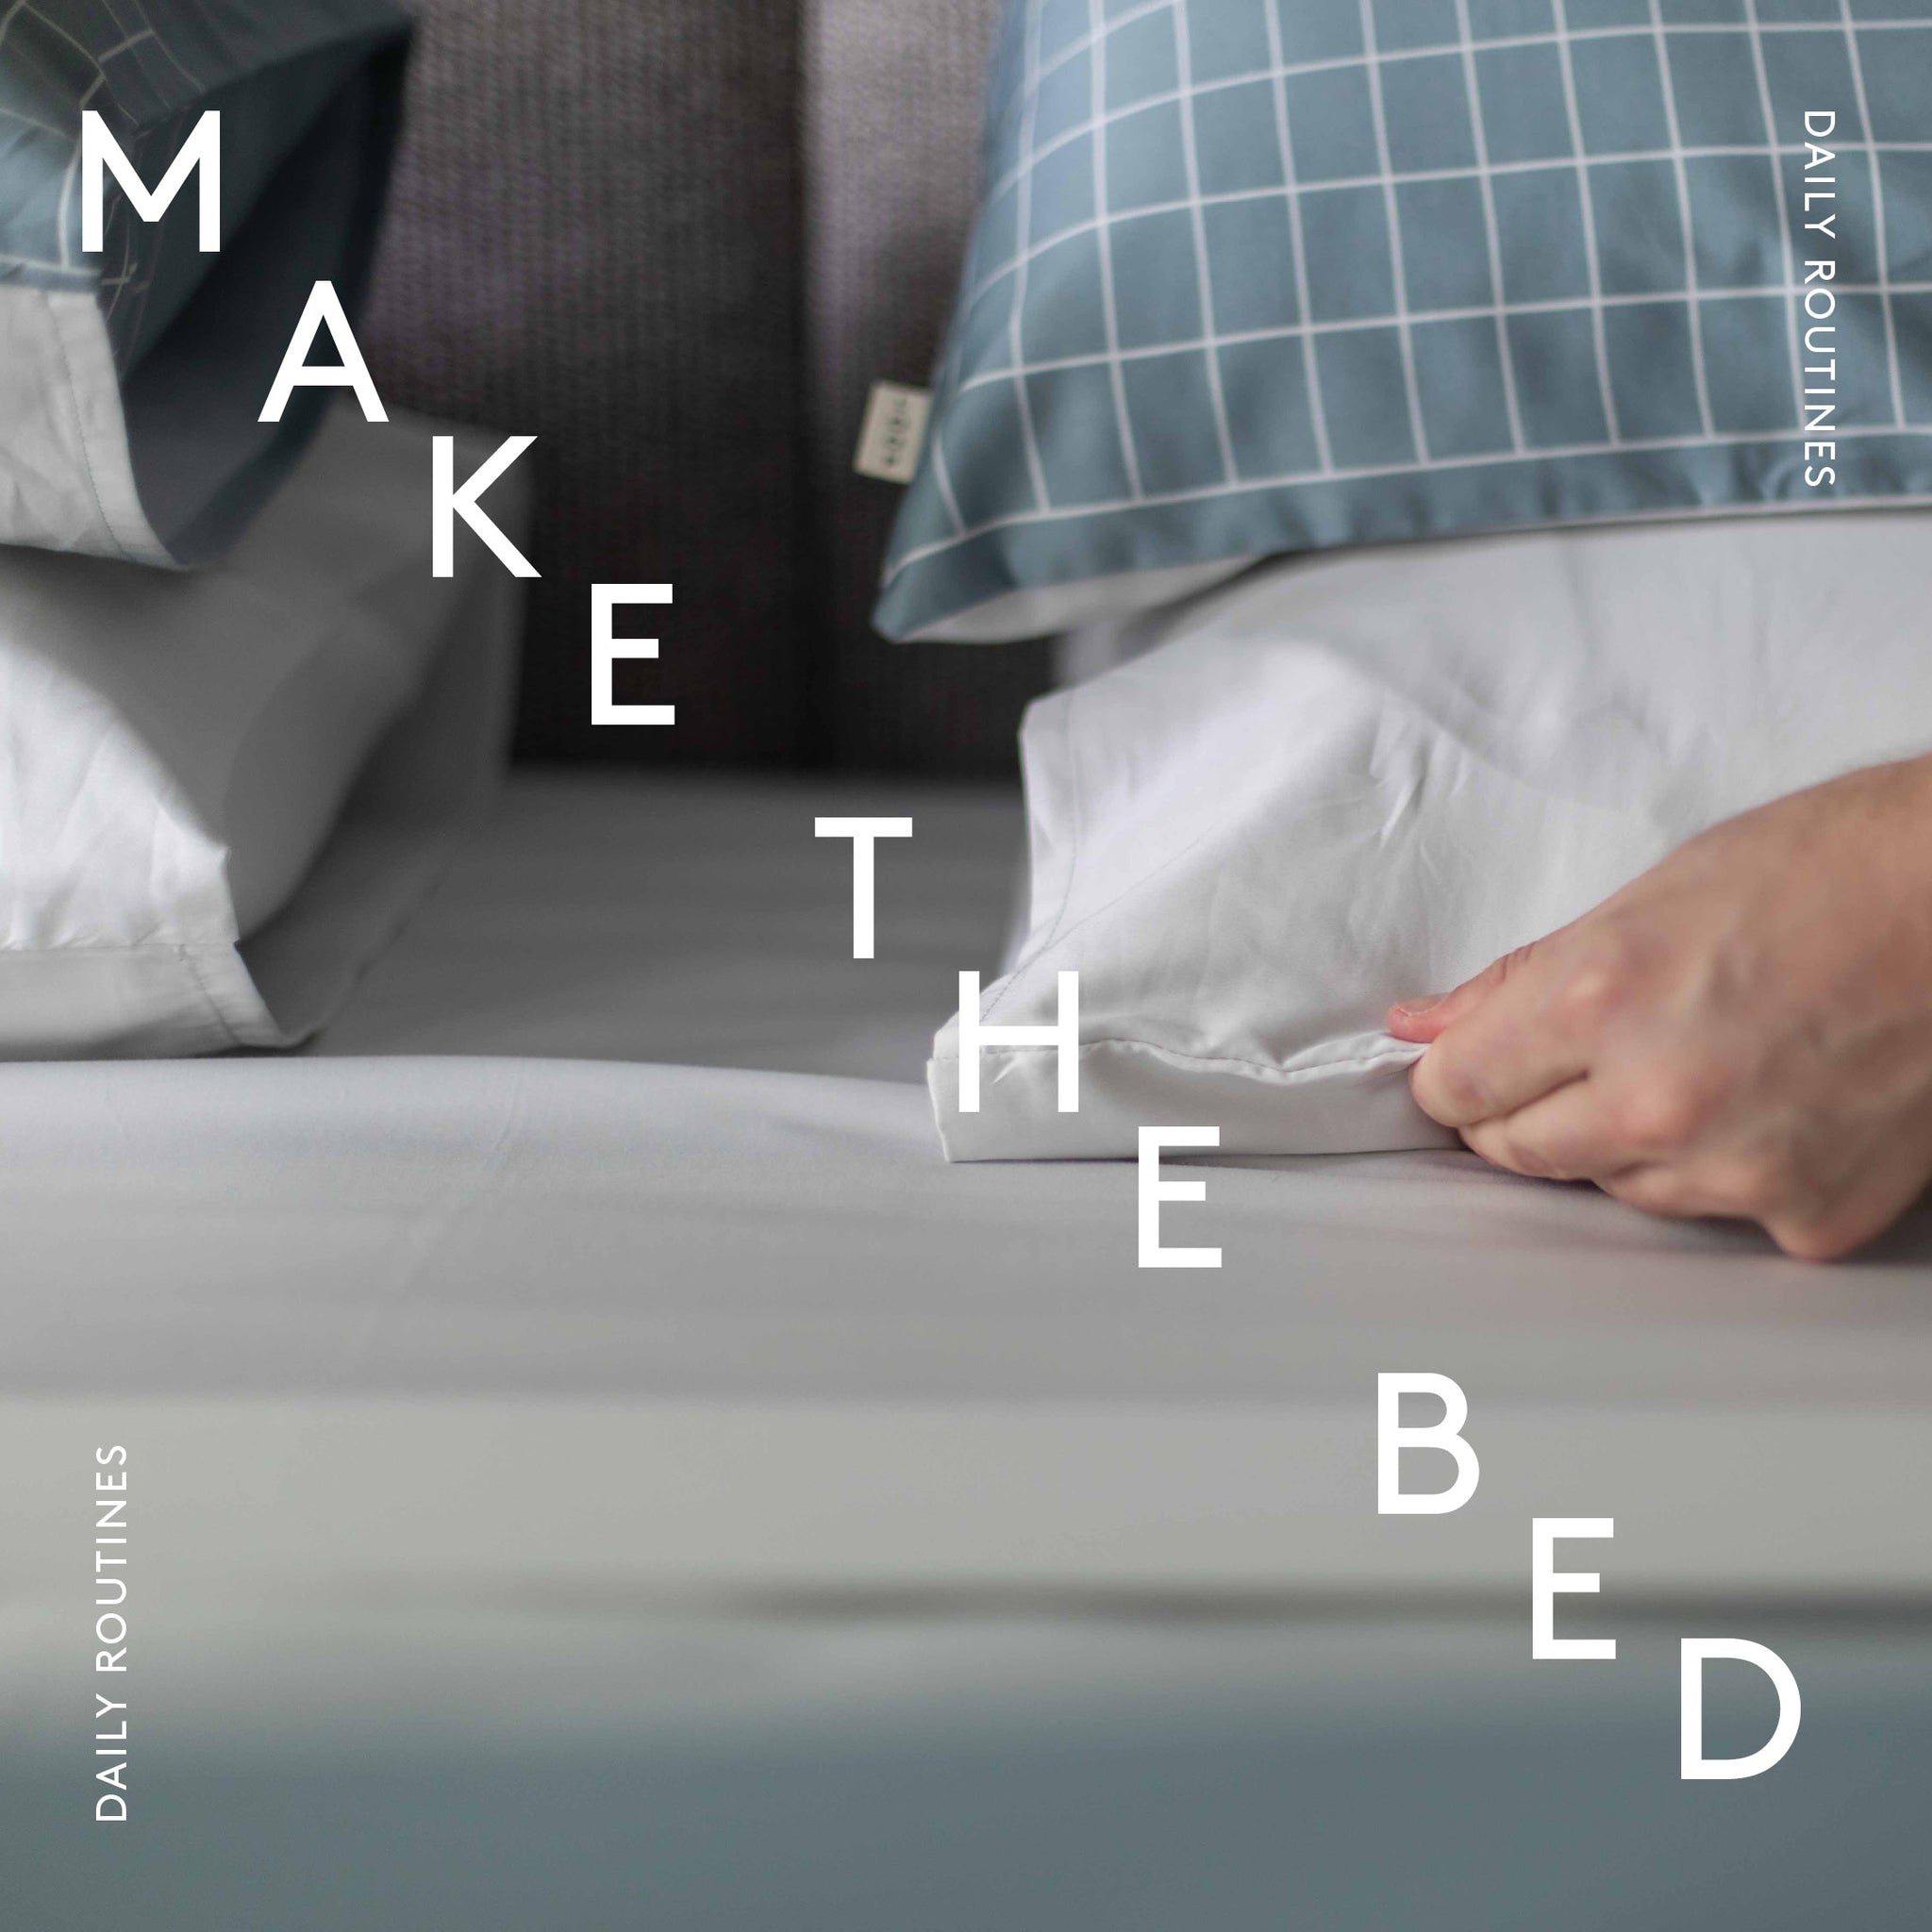 What are the benefits of making the bed?